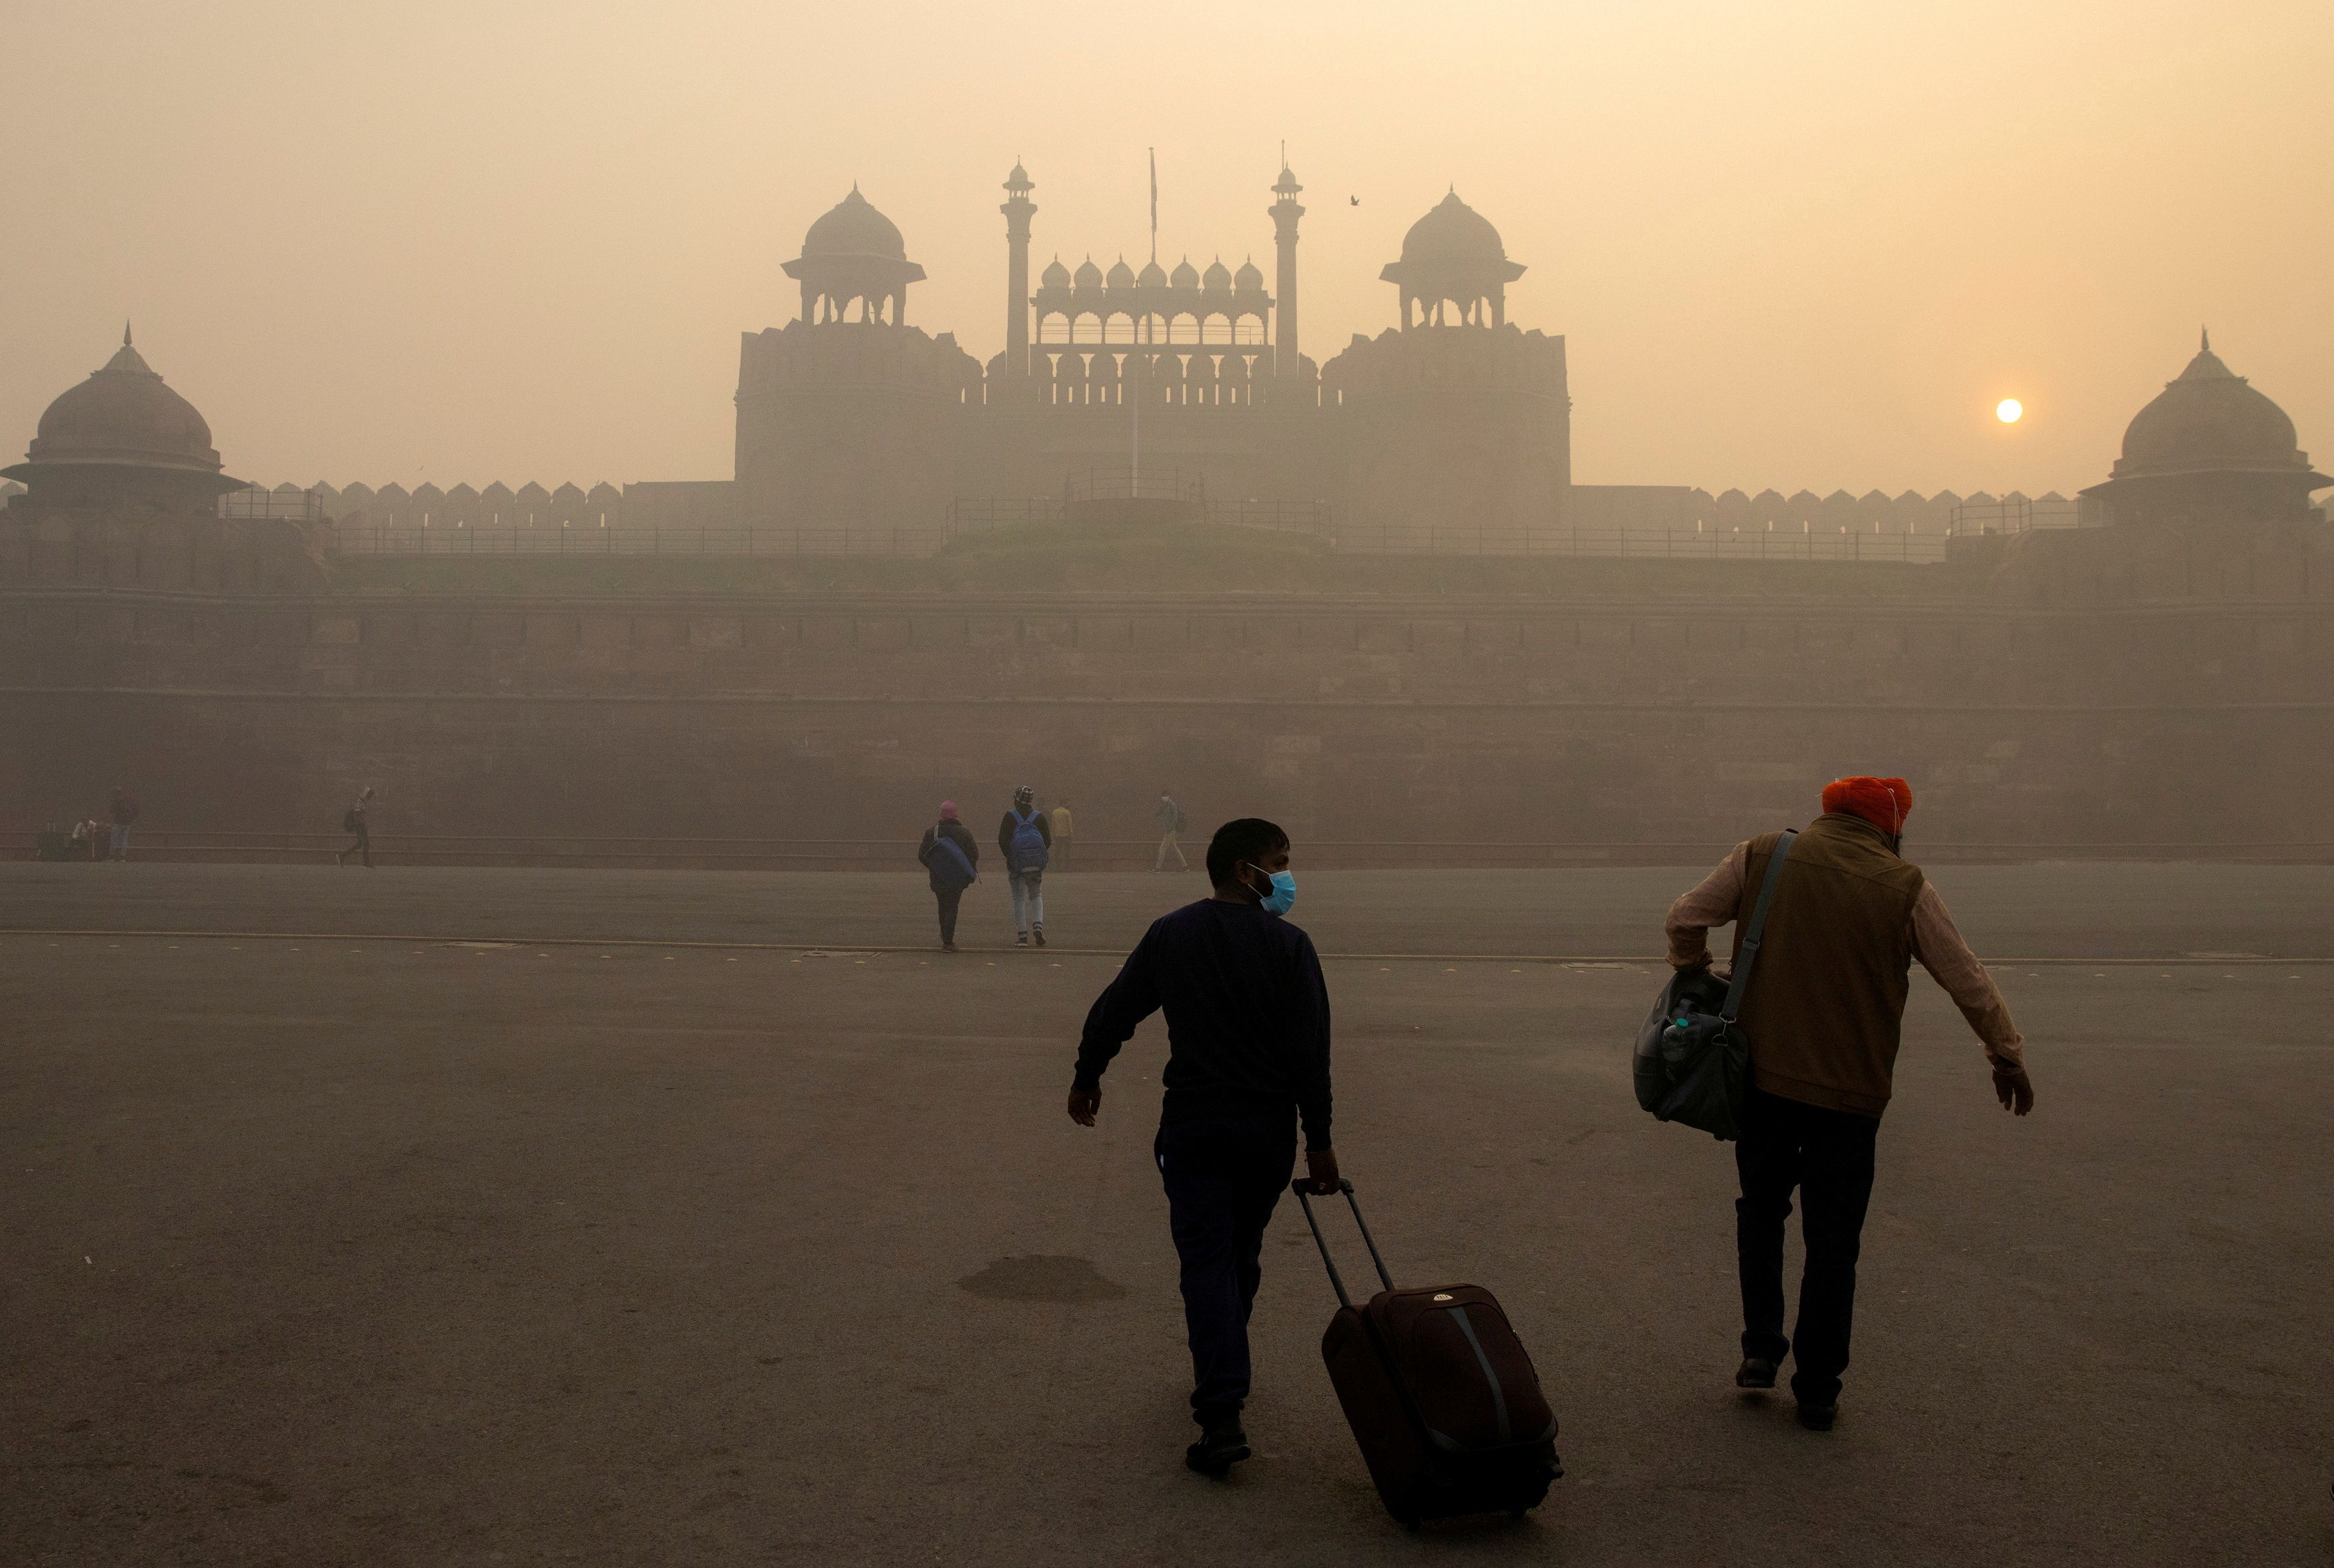 People arrive to visit the Red Fort on a smoggy morning in the old quarters of Delhi, India, November 10, 2020. REUTERS/Danish Siddiqui//File Photo